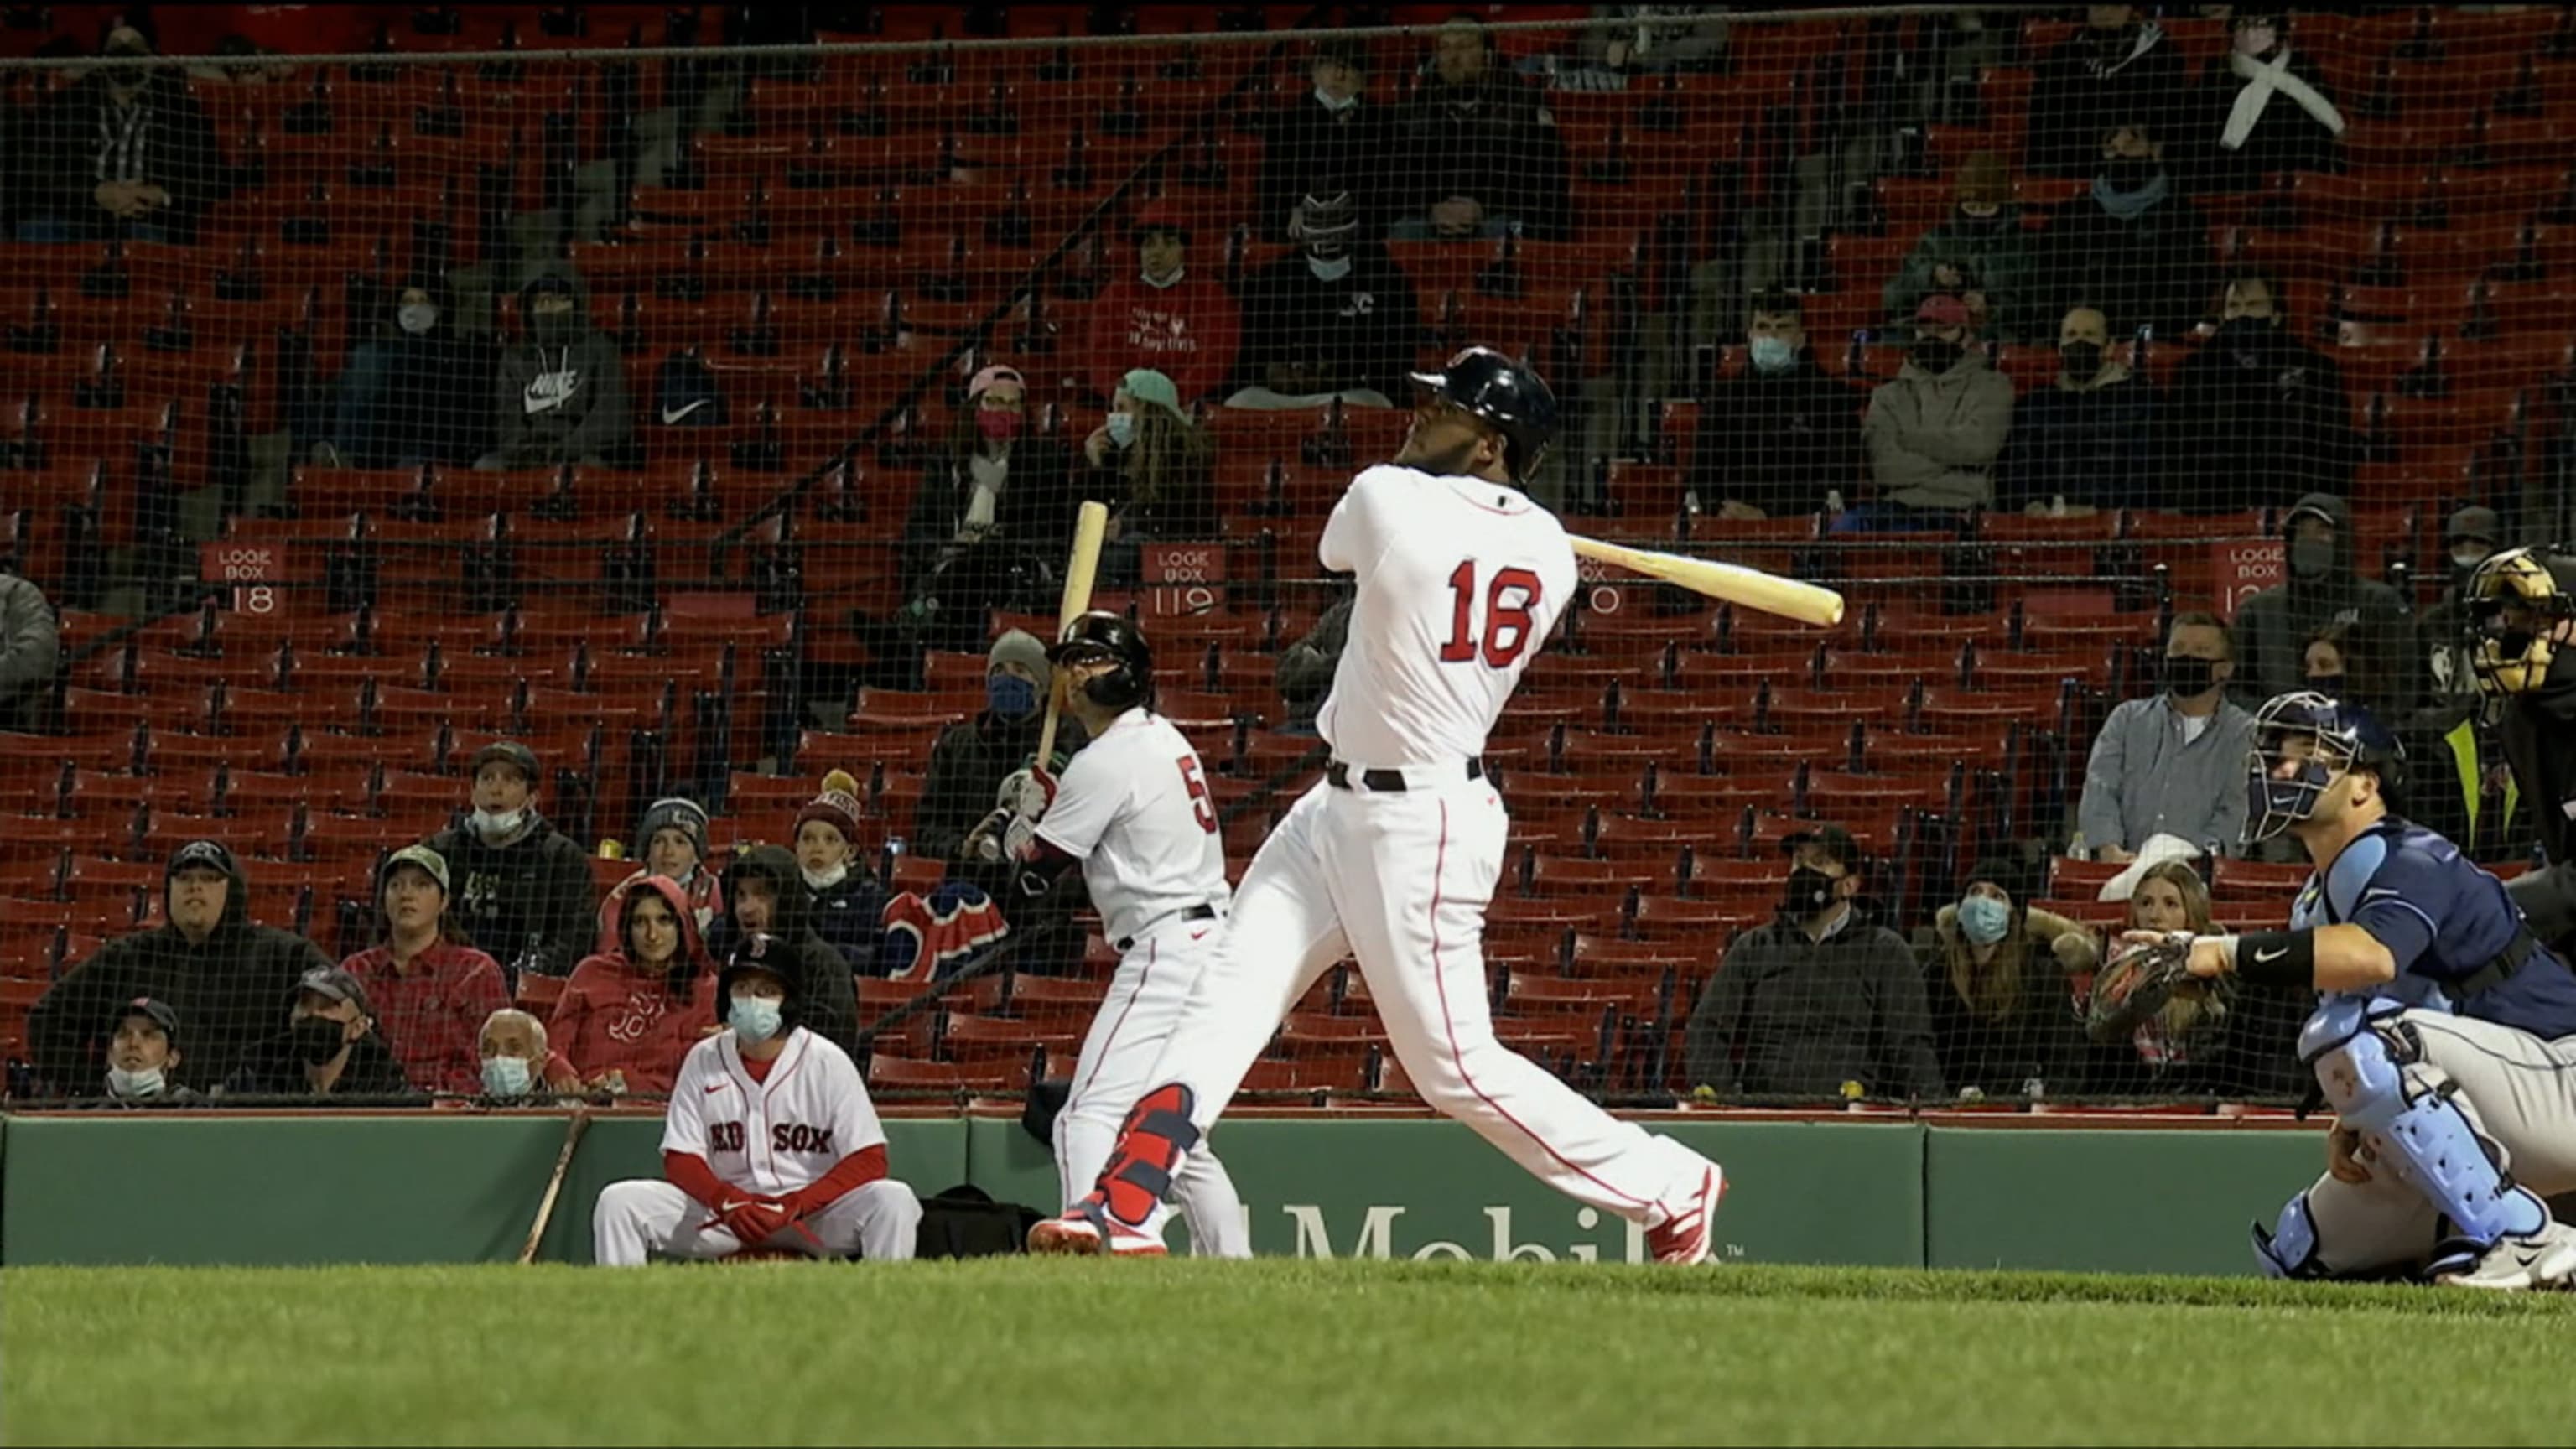 Red Sox score early and often in another rout - The Boston Globe